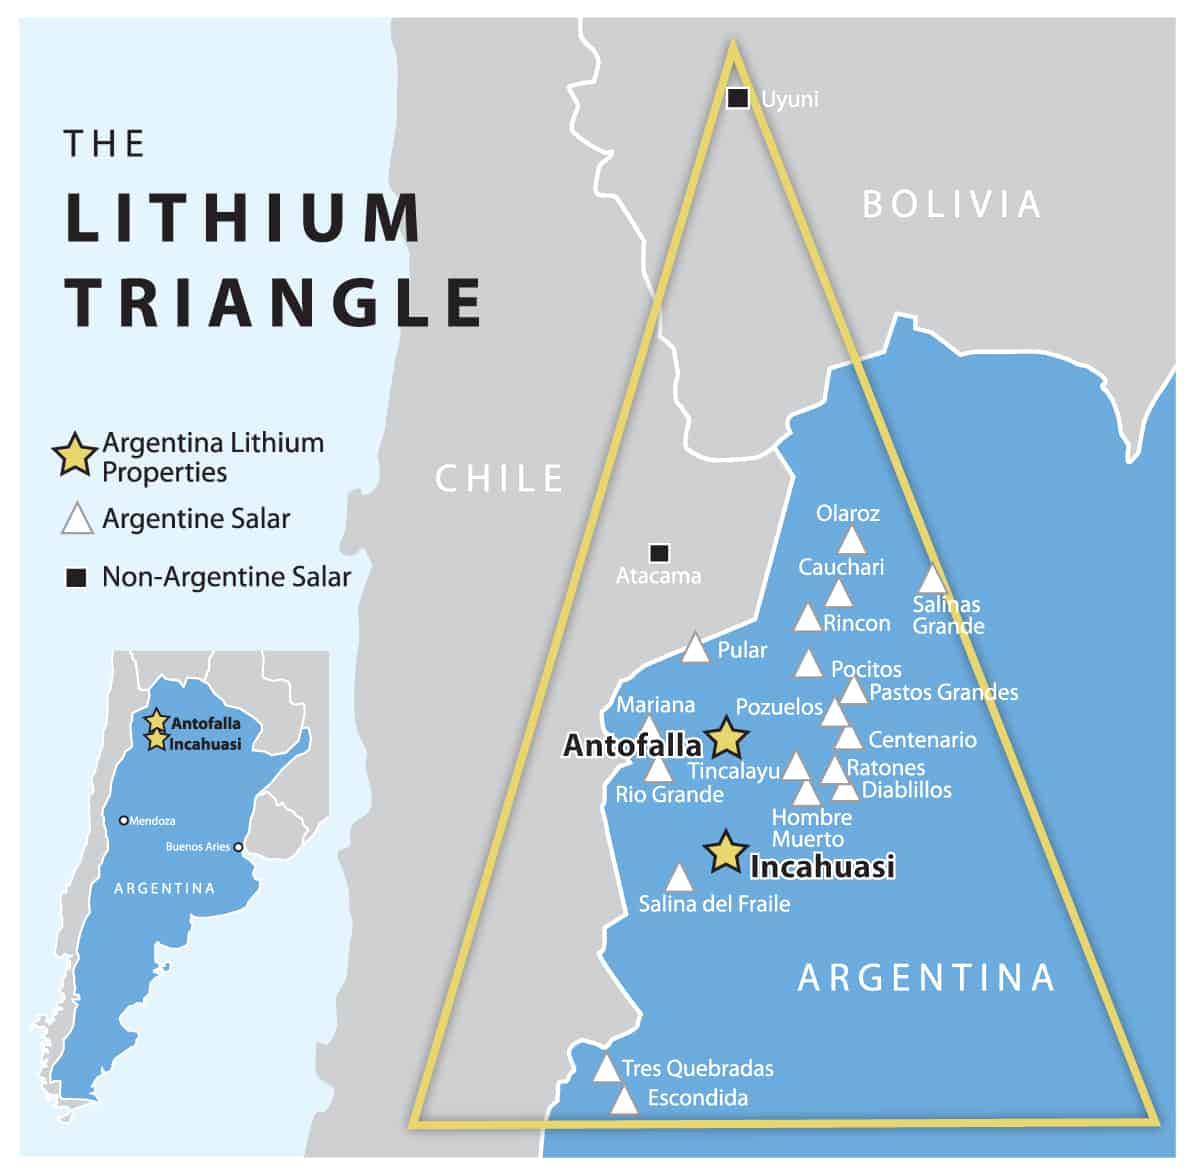 The lithium triangle in South America is composed of Argentina, Bolivia and Chile. (Photo internet reproduction)